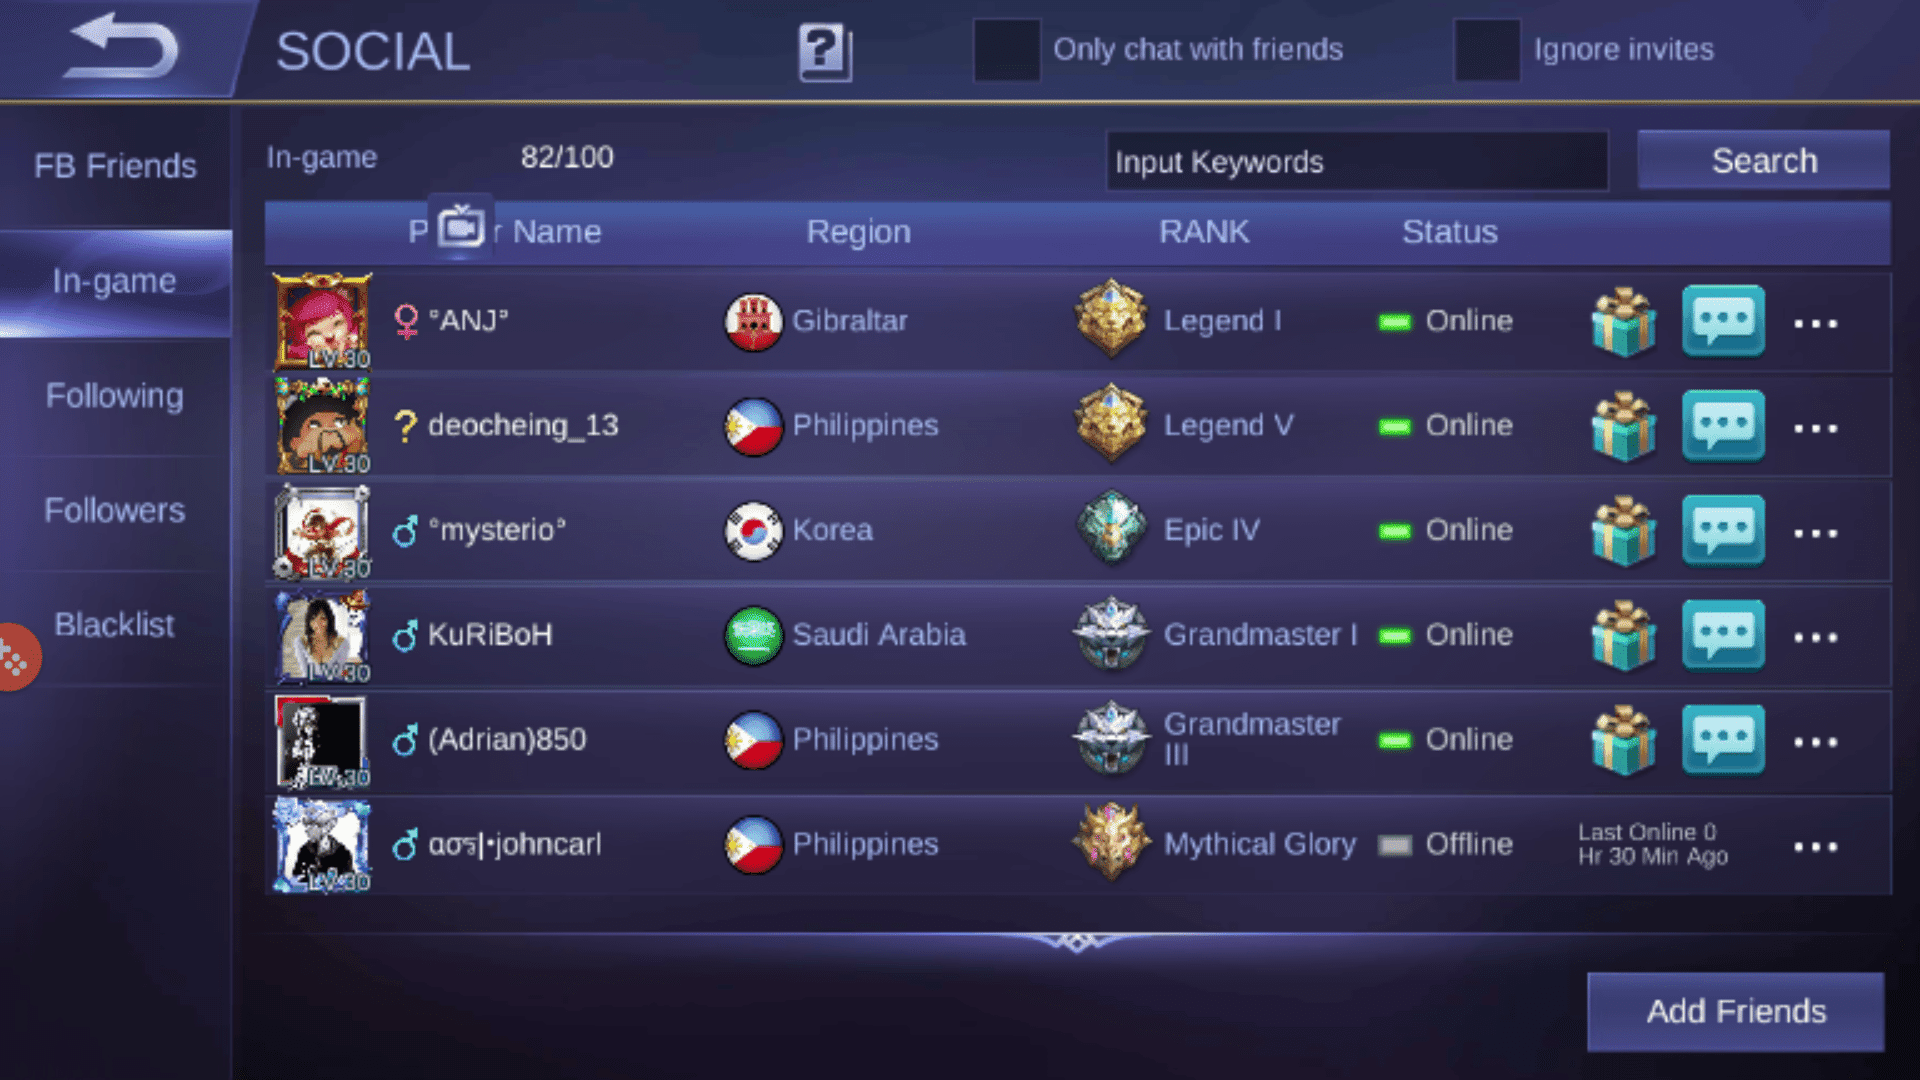 How to Block and Unblock friends in Mobile Legends?